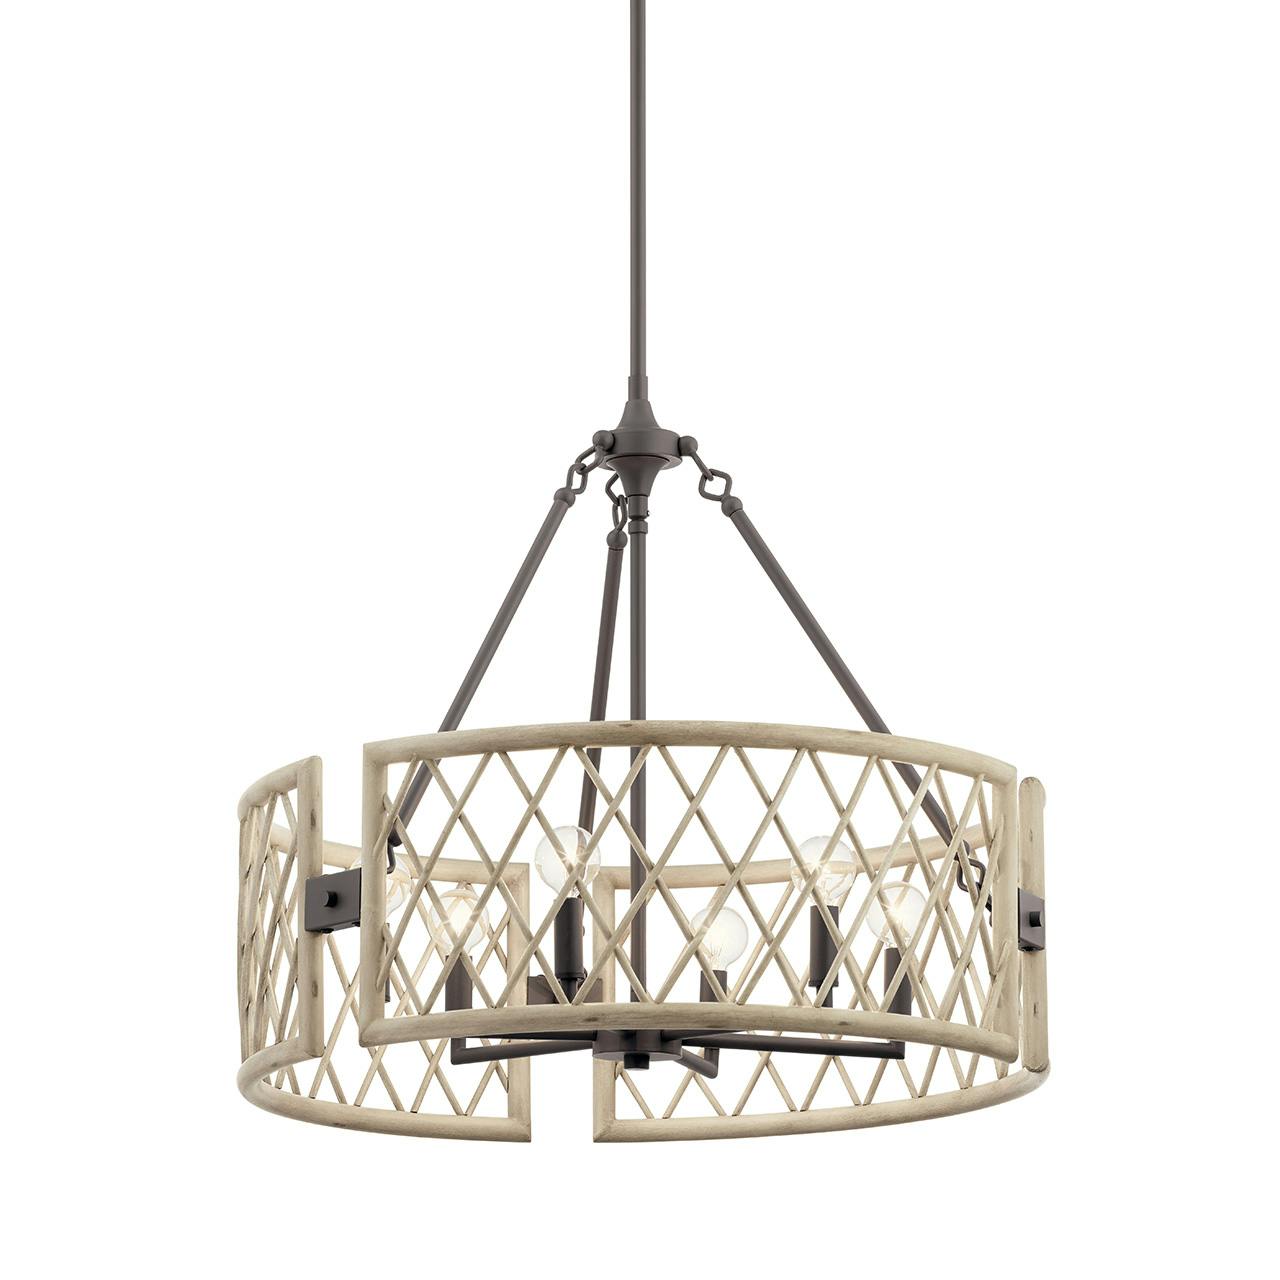 Oana 6 Light Chandelier White Washed Wood without the canopy on a white background